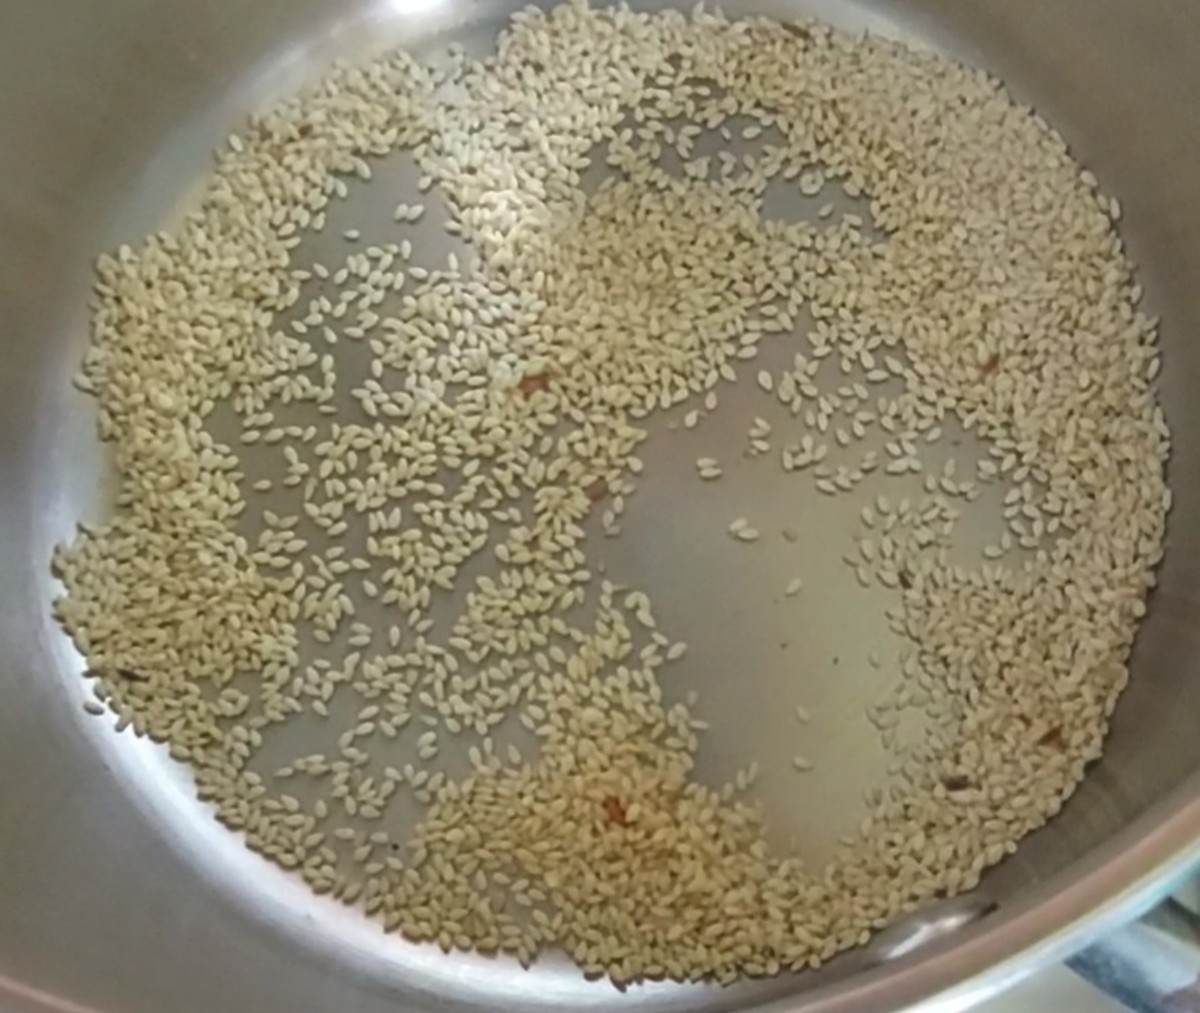 In the same pan, add 2 tablespoons of sesame seeds and fry till the seeds start to splutter and slightly change color. Transfer to a plate.